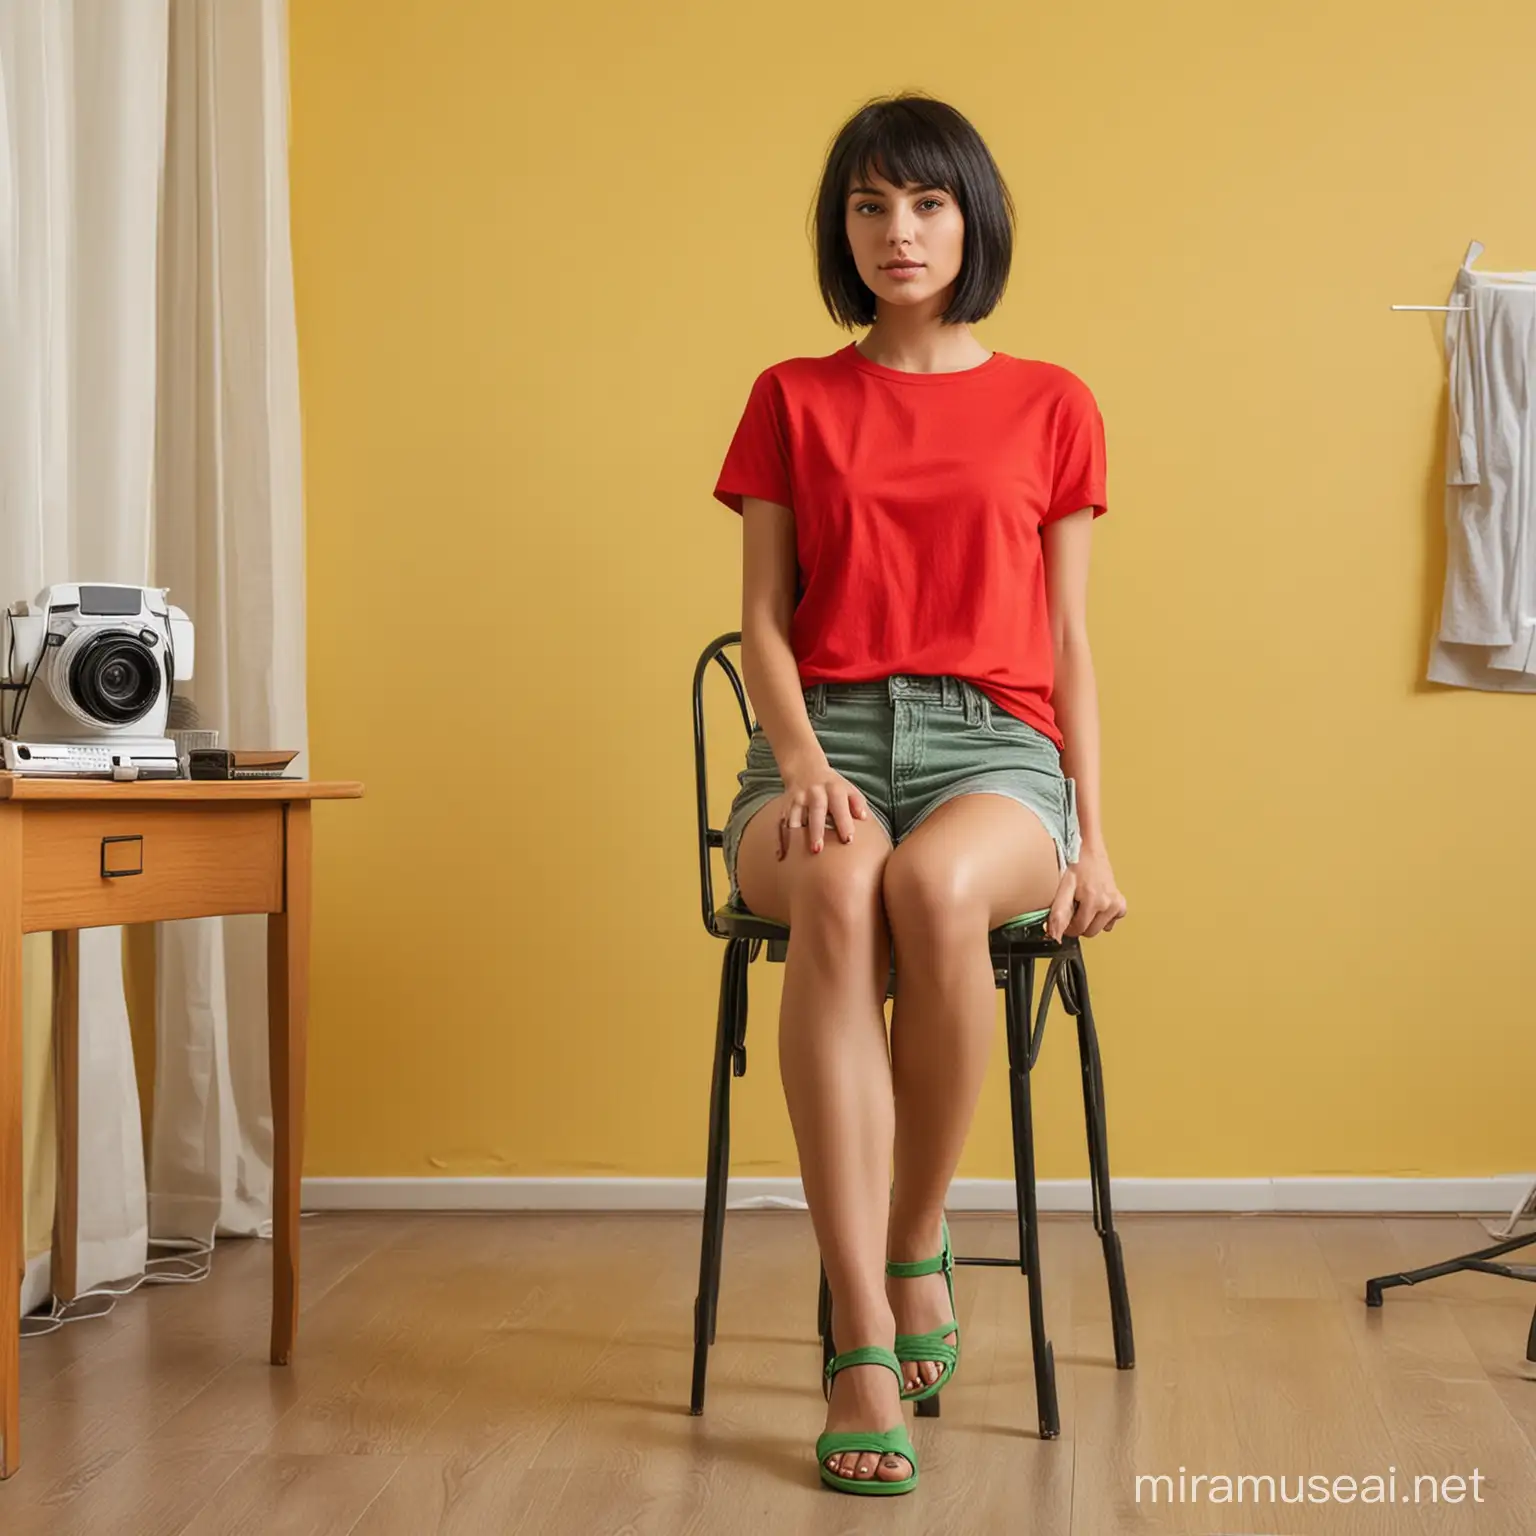 Elegant Woman in Red TShirt Posing on Office Chair at Dawn